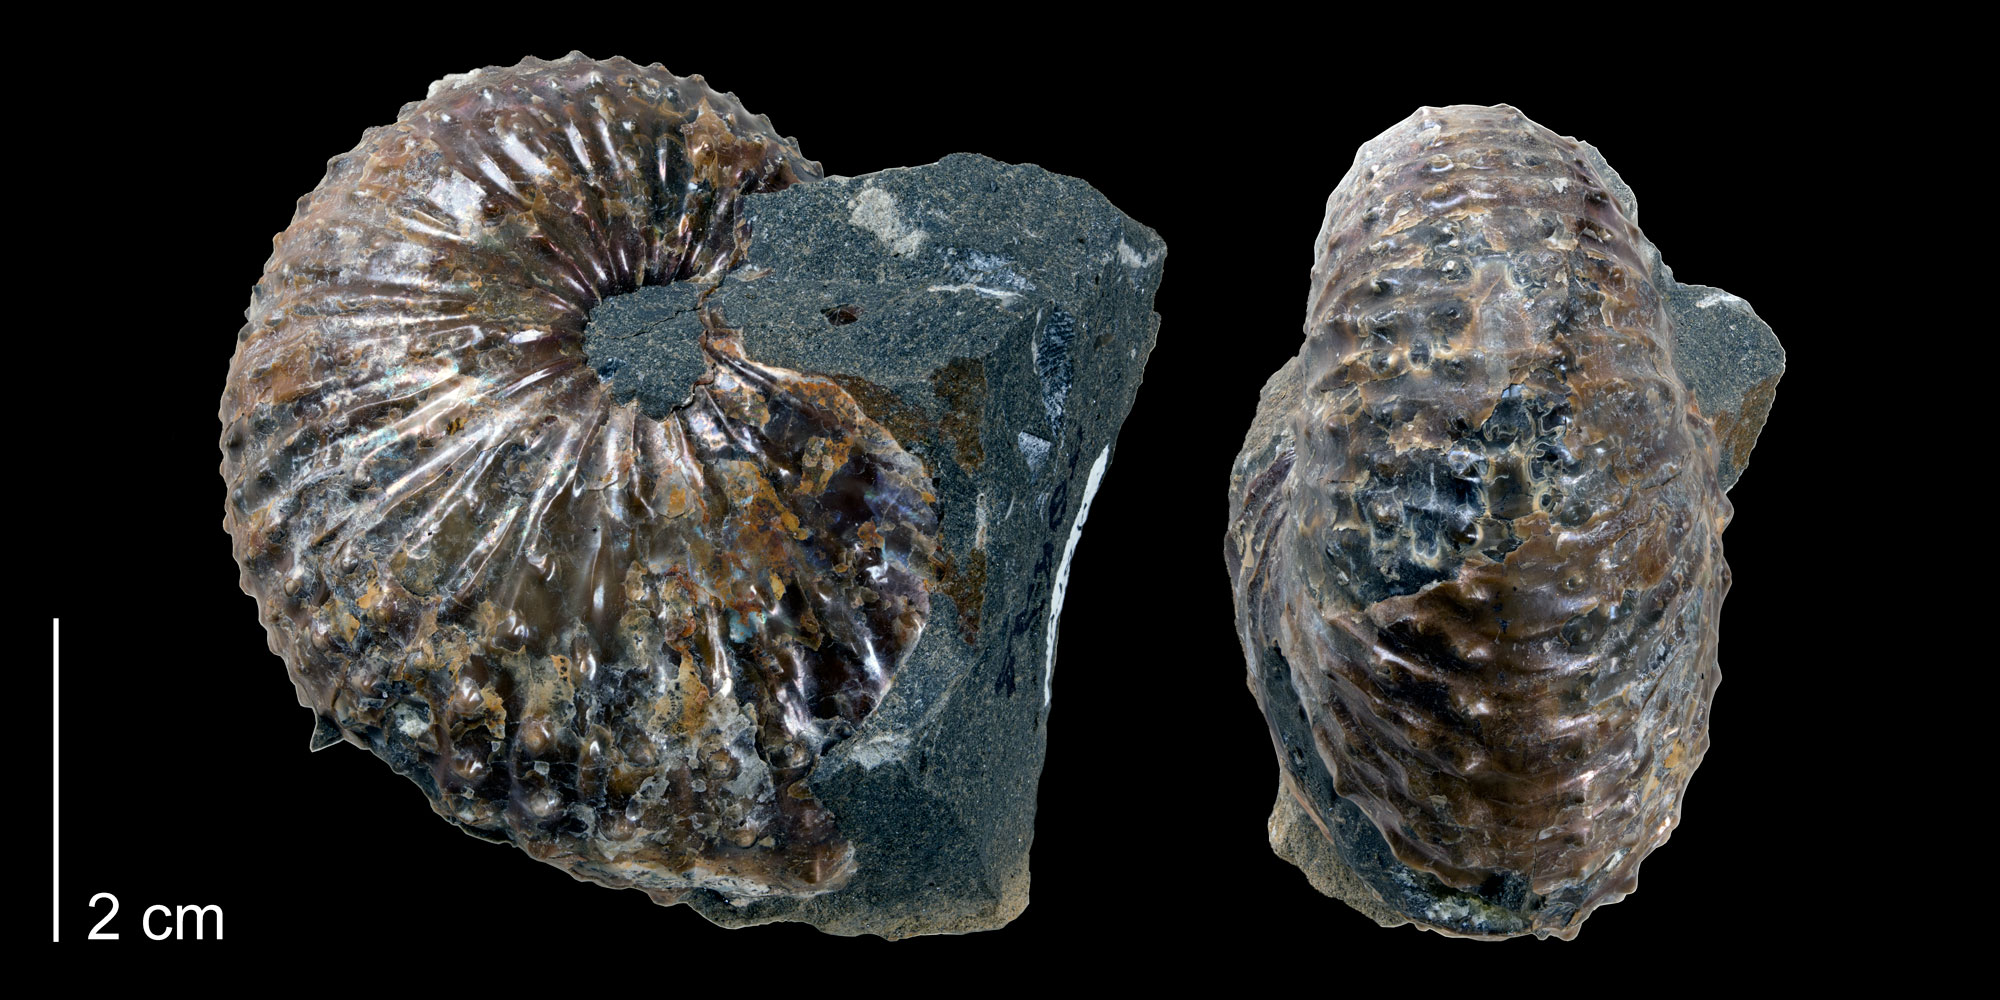 Photograph showing two views of the shell of an ammonoid from the Late Cretaceous of South Dakota. The photo shows the same shell in side view and from the narrow side. The shell has regularly spaced ridges and is brown and shiny. It is preserved on a small black stone.